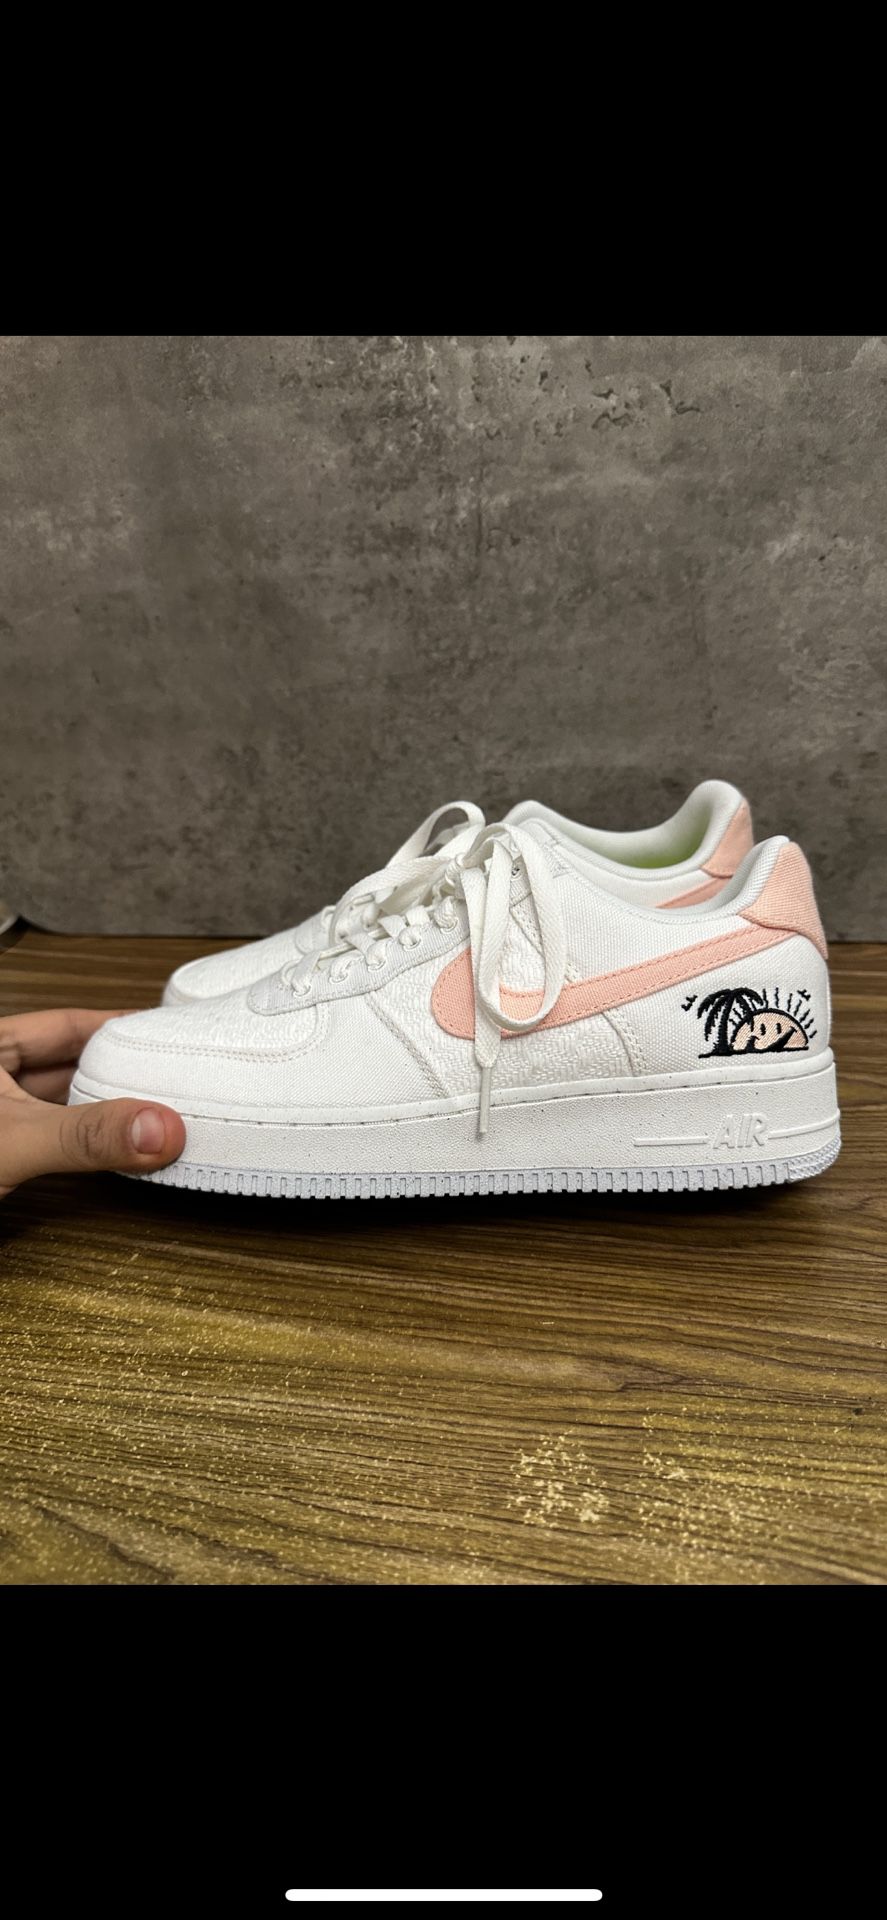 Size 9W - Nike Air Force 1 Low Sun Club - Hot Pink for Sale in Bayonne, NJ  - OfferUp